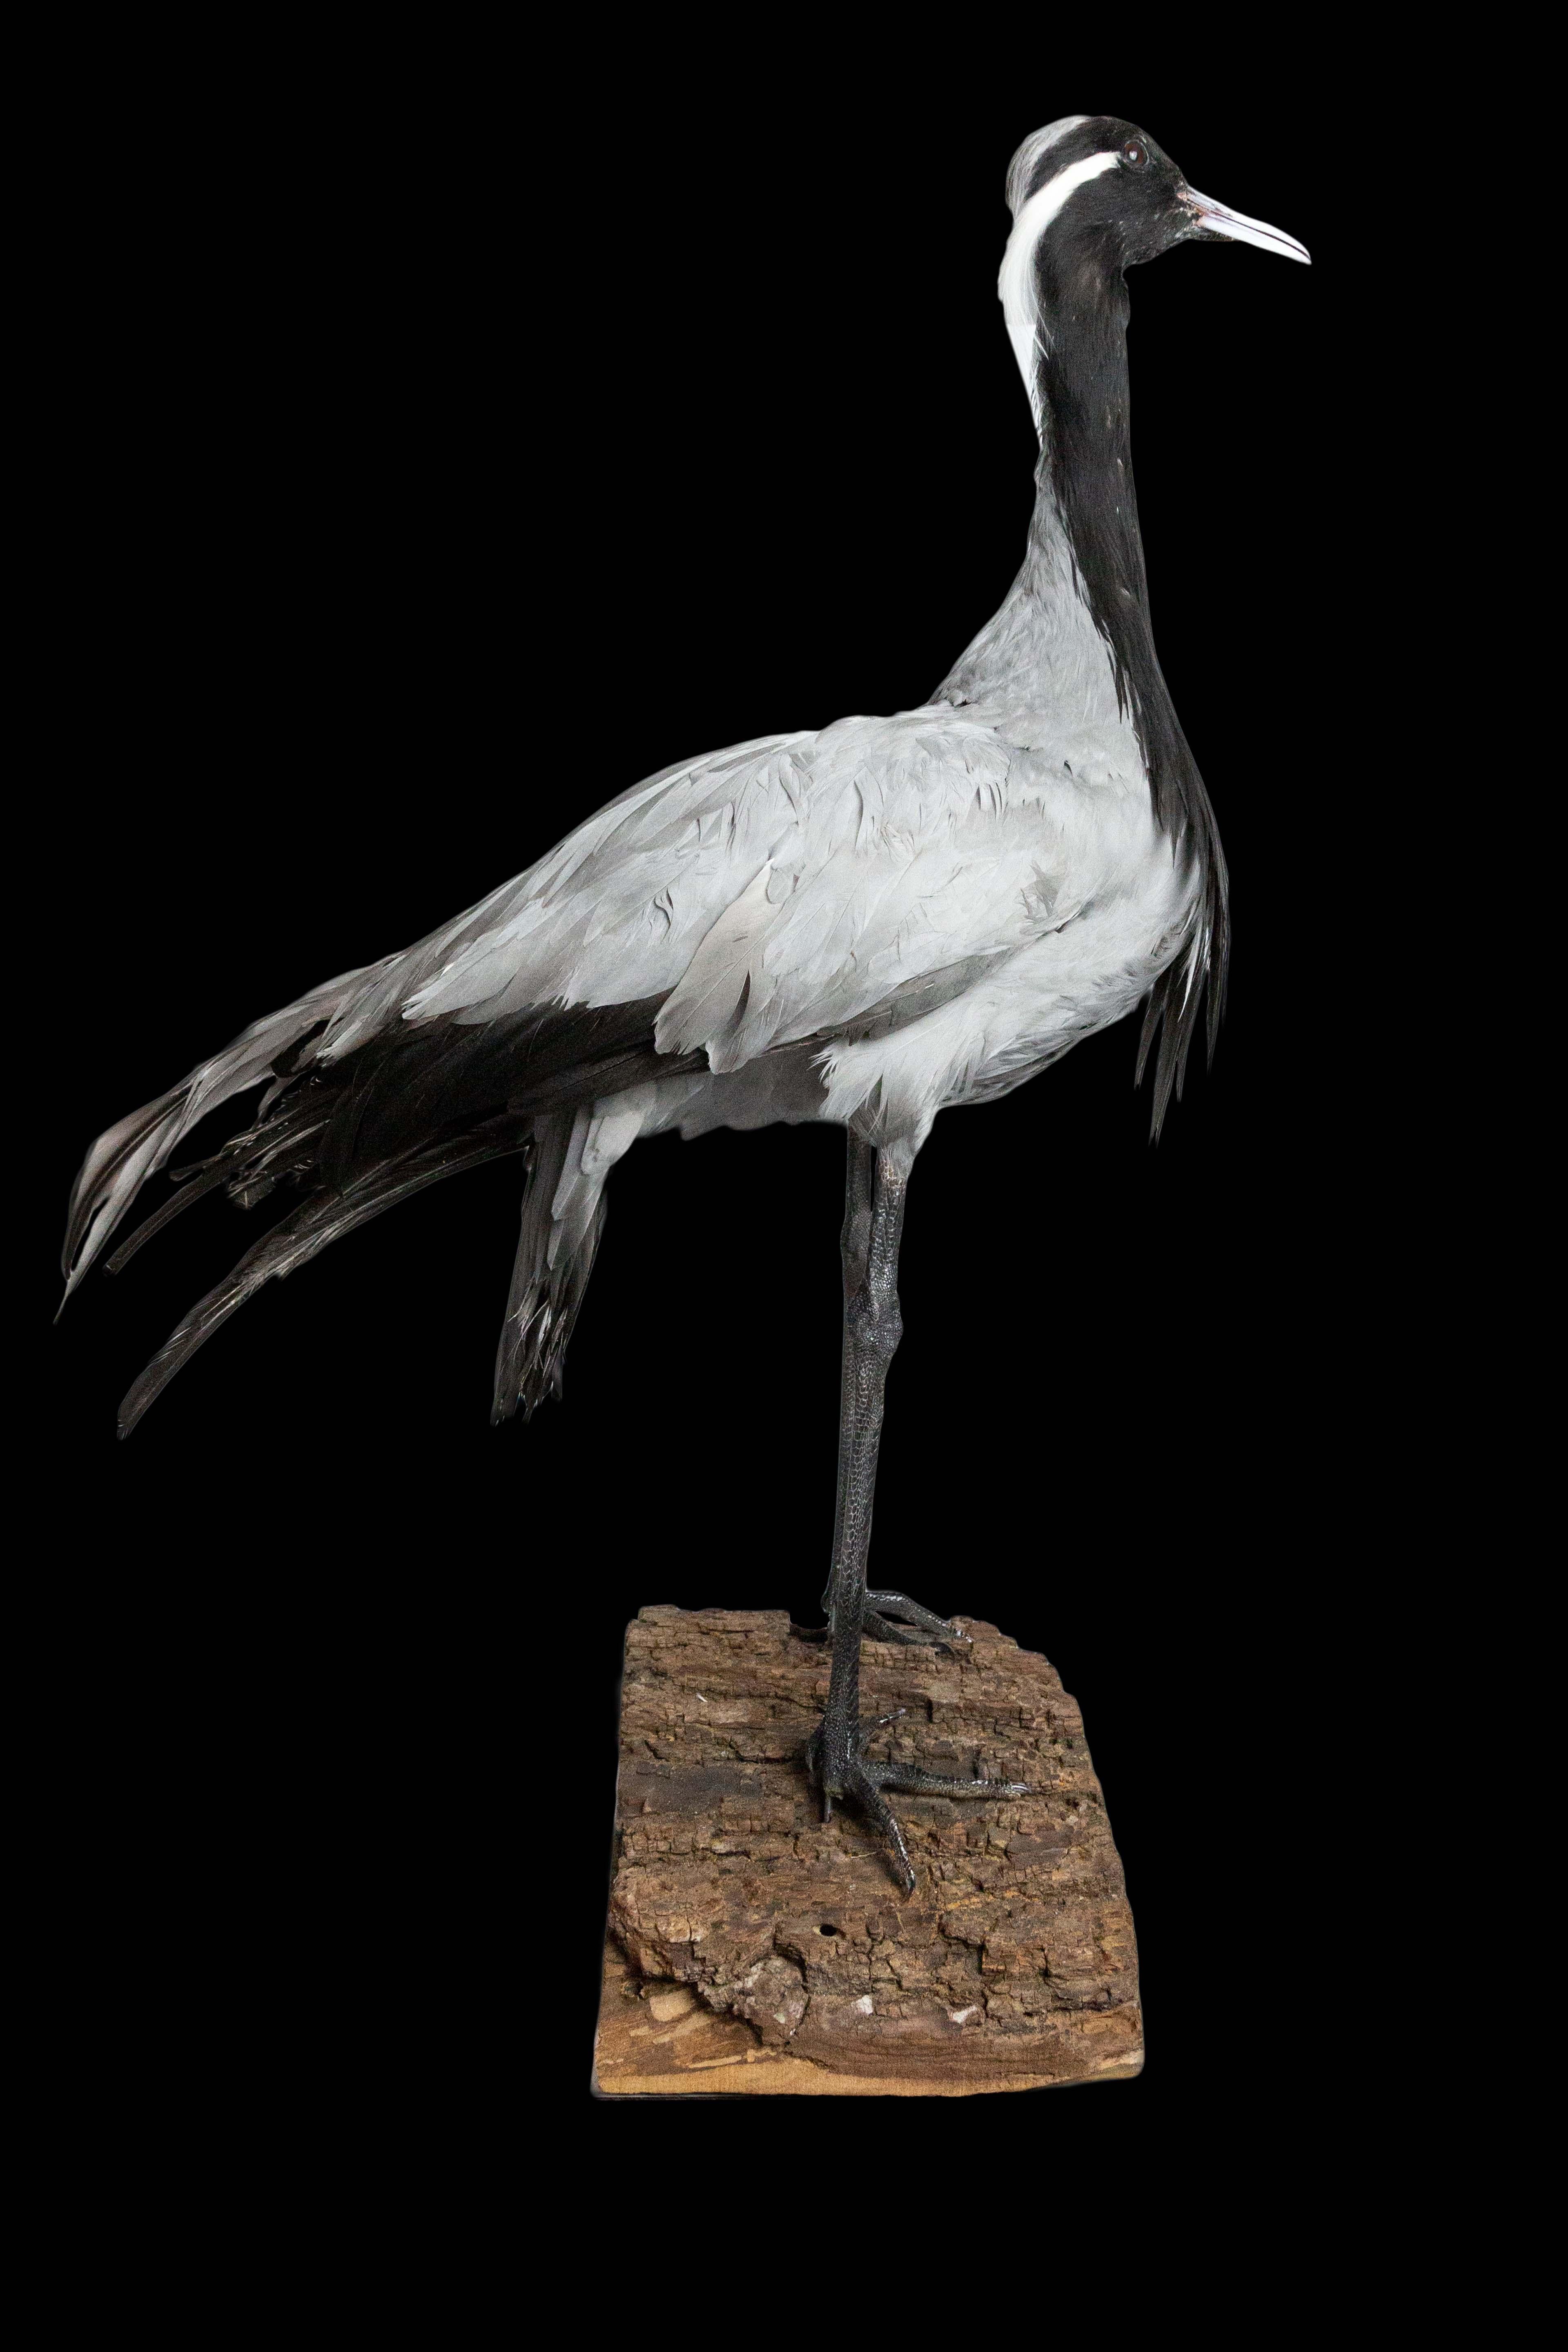 This taxidermy Demoiselle Crane is a remarkable piece that captures the beauty and grace of this stunning bird. Mounted on a wood log, this mount measures 12